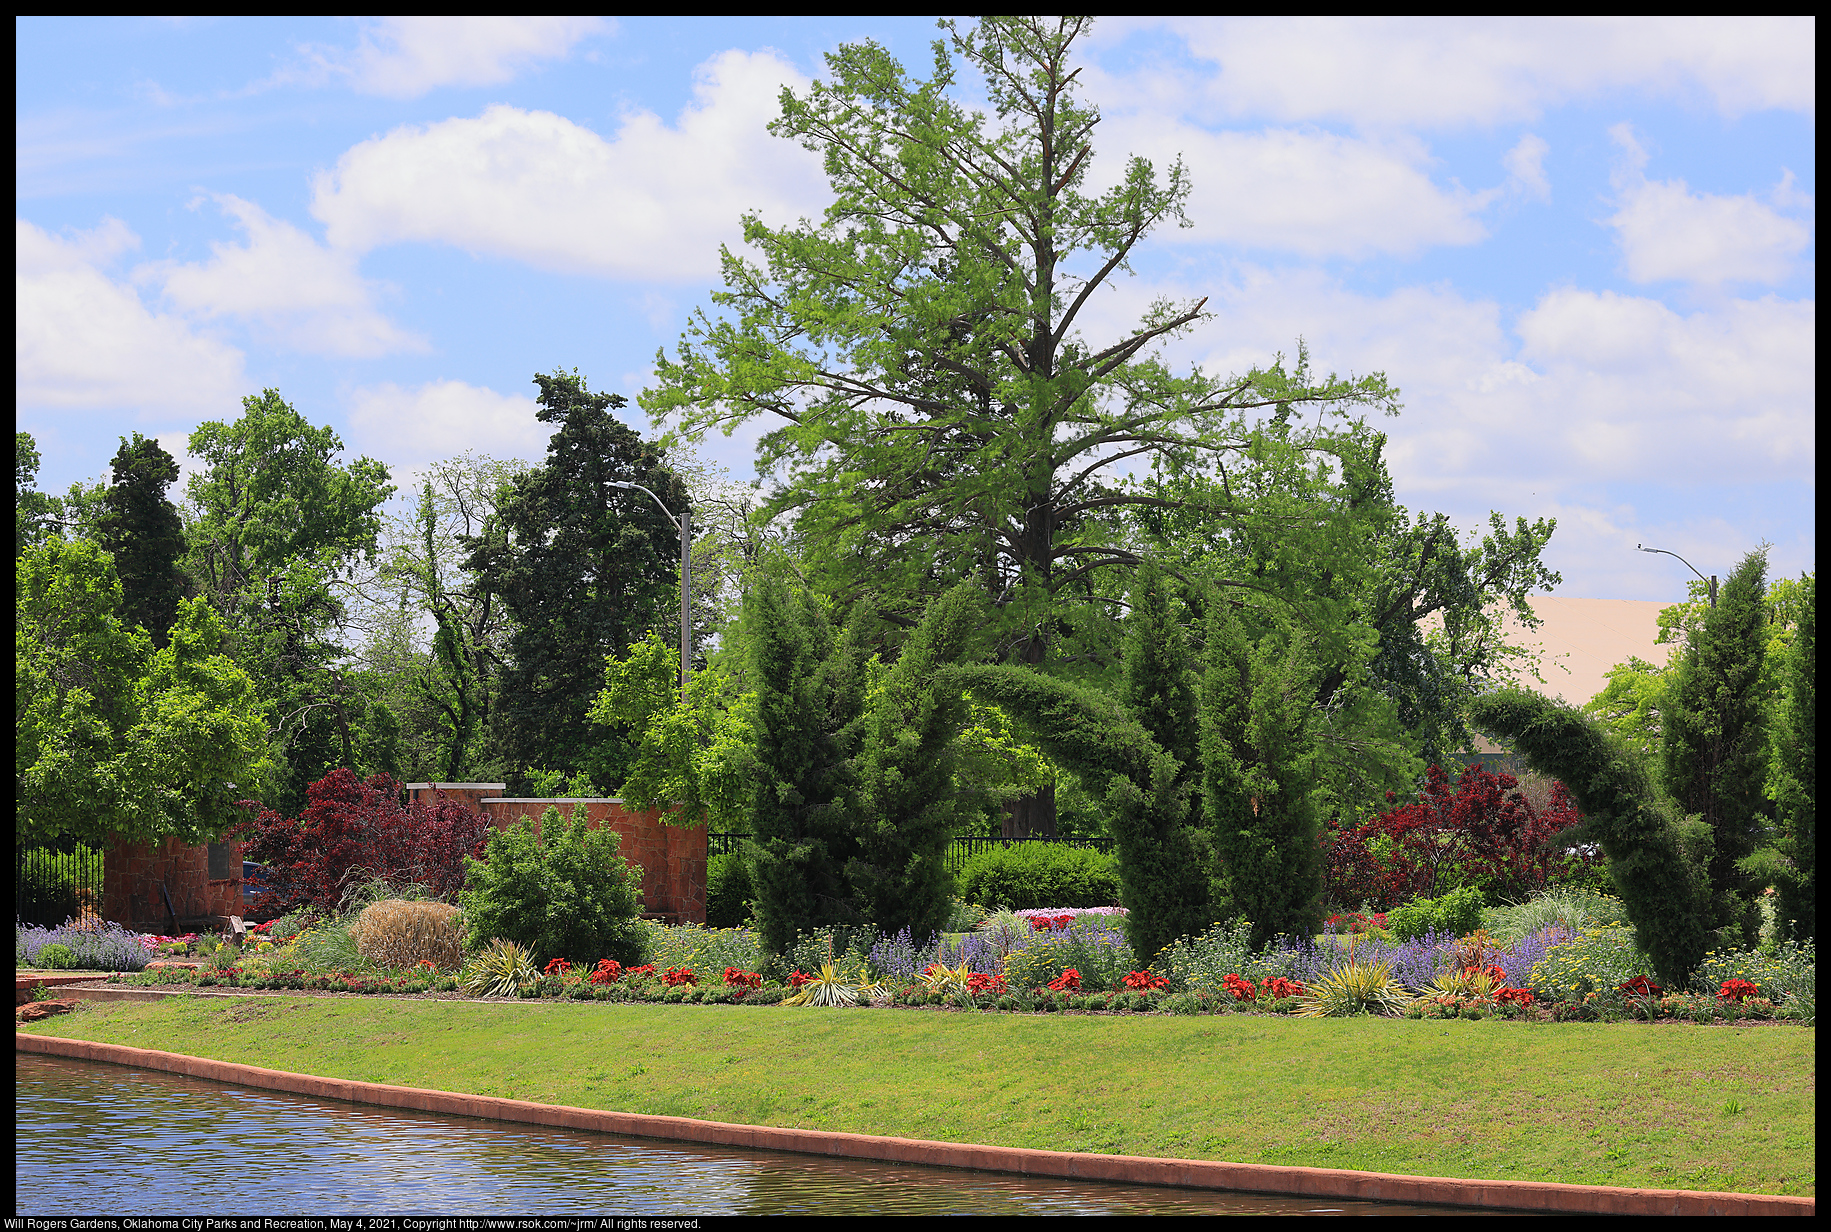 Will Rogers Gardens, Oklahoma City Parks and Recreation, May 4, 2021